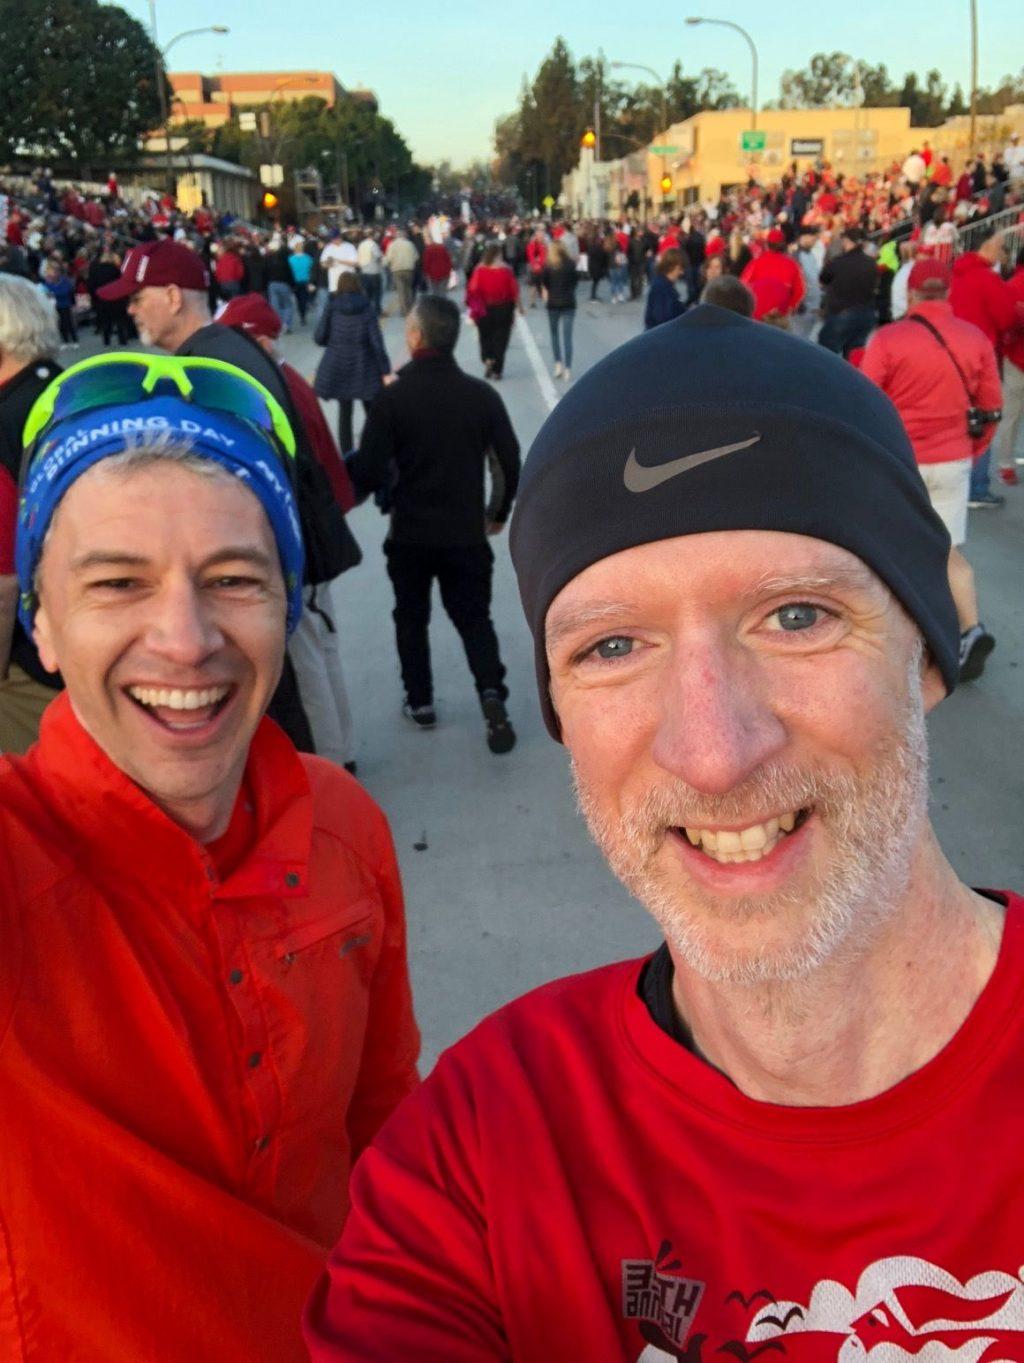 Left, Bradley Griffin, Fine Arts divisional dean, and right, Al Sturgeon, former Caruso School of Law dean of students and dean of Graduate Programs, pose together at a race in Pasadena, Calif. Photo courtesy of Al Sturgeon